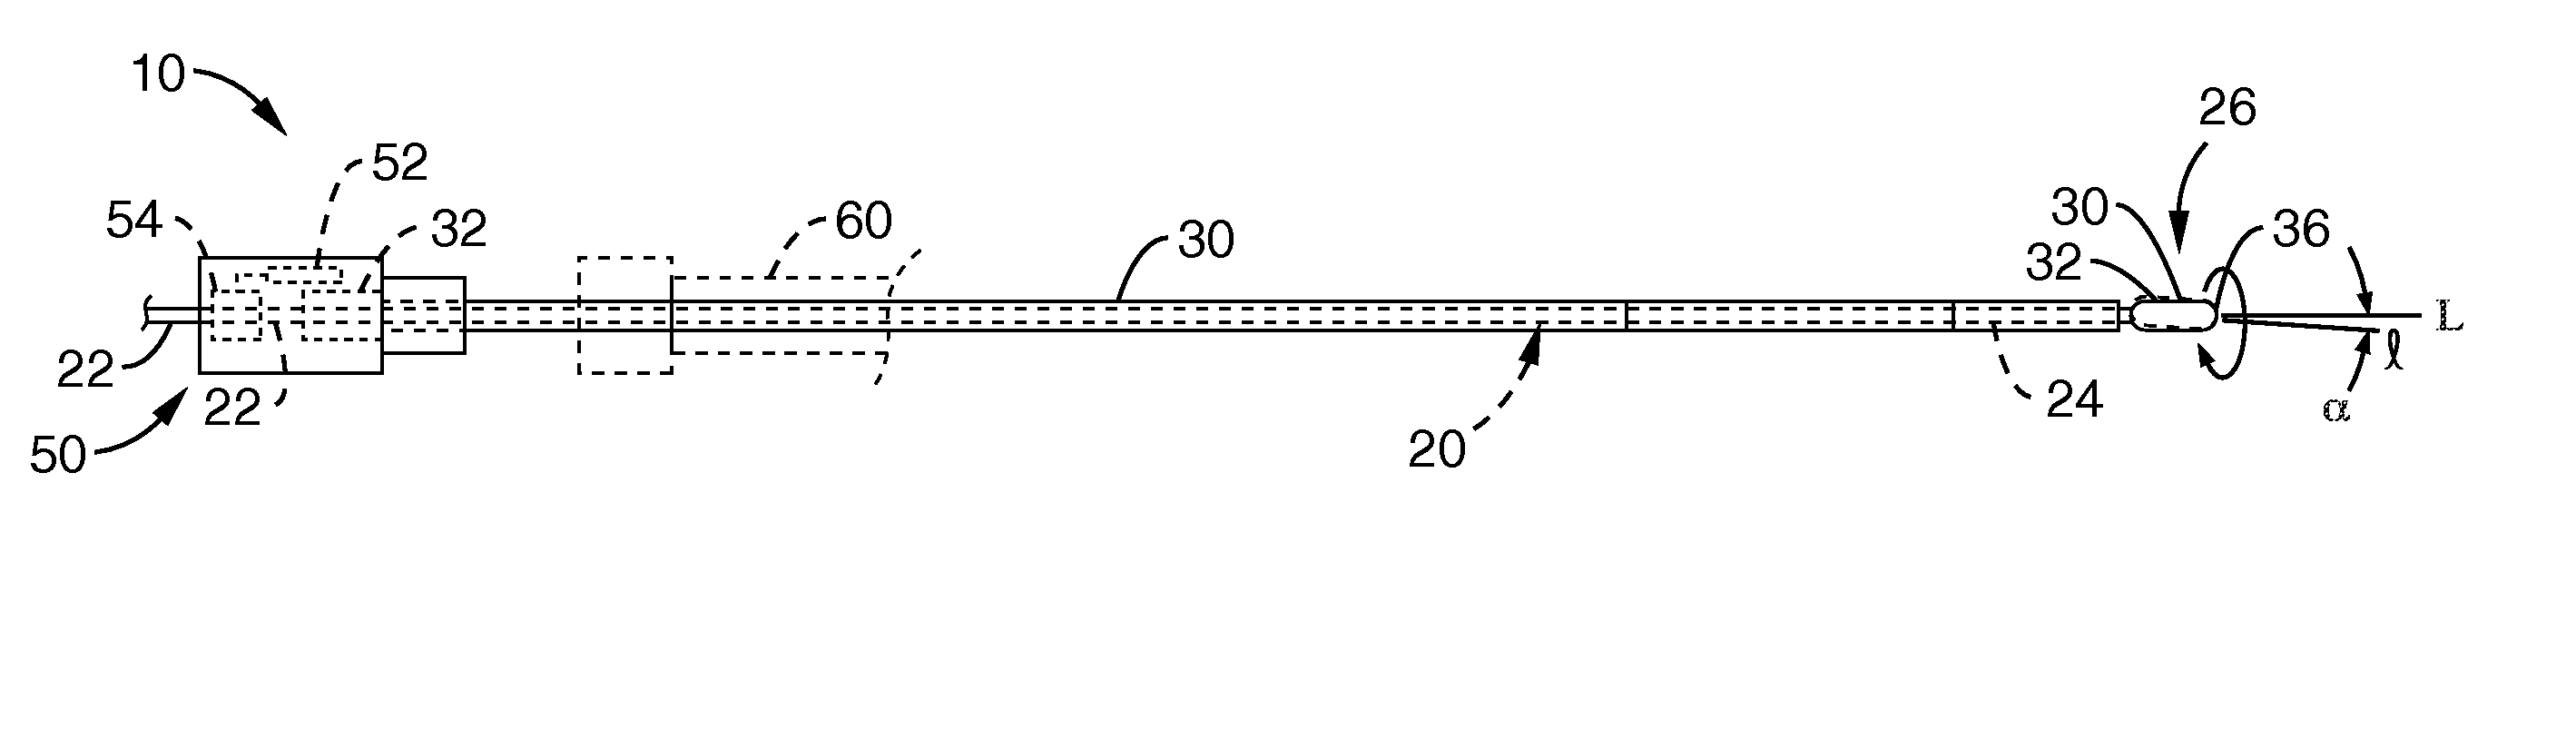 Total vascular occlusion treatment system and method